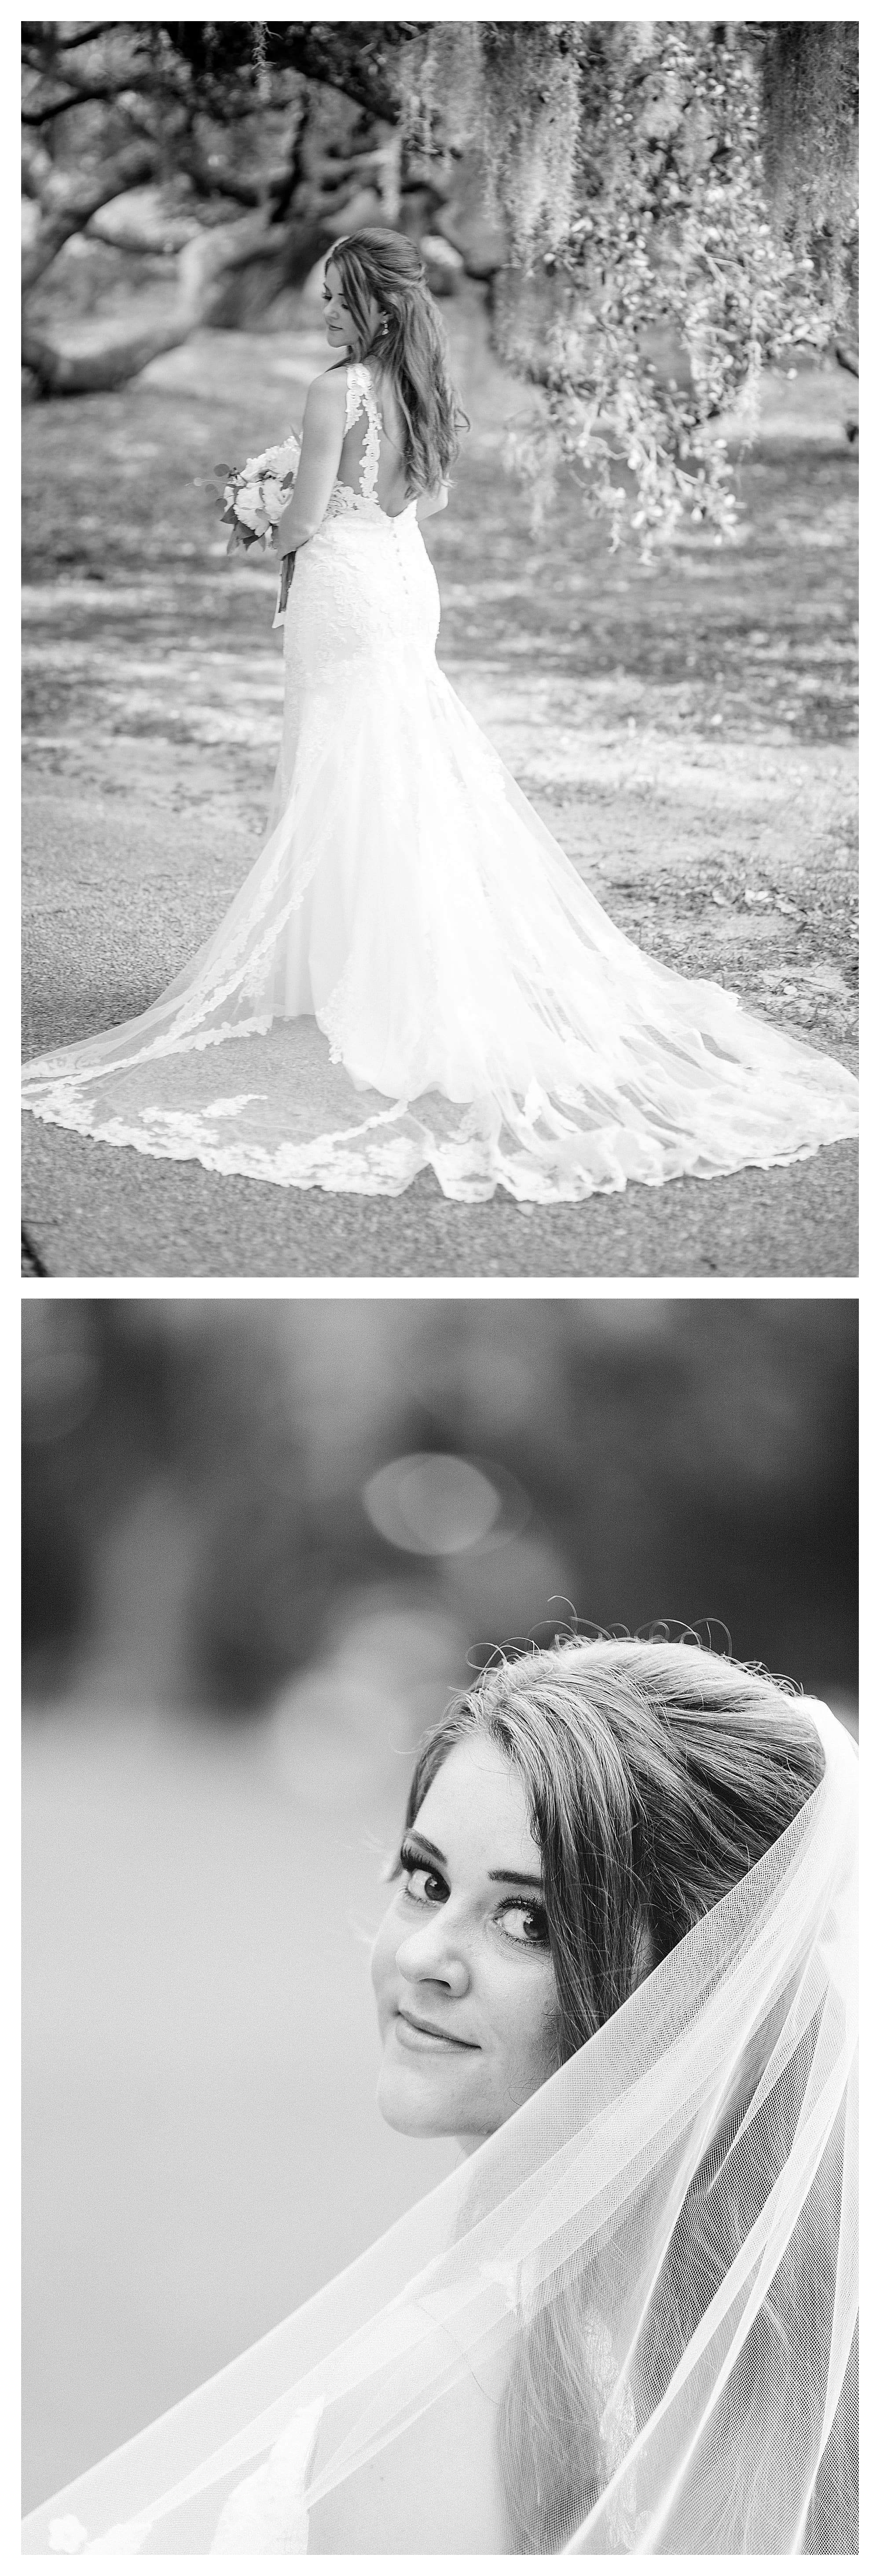 Black and White photos of bride in wedding dress and veil standing under tree